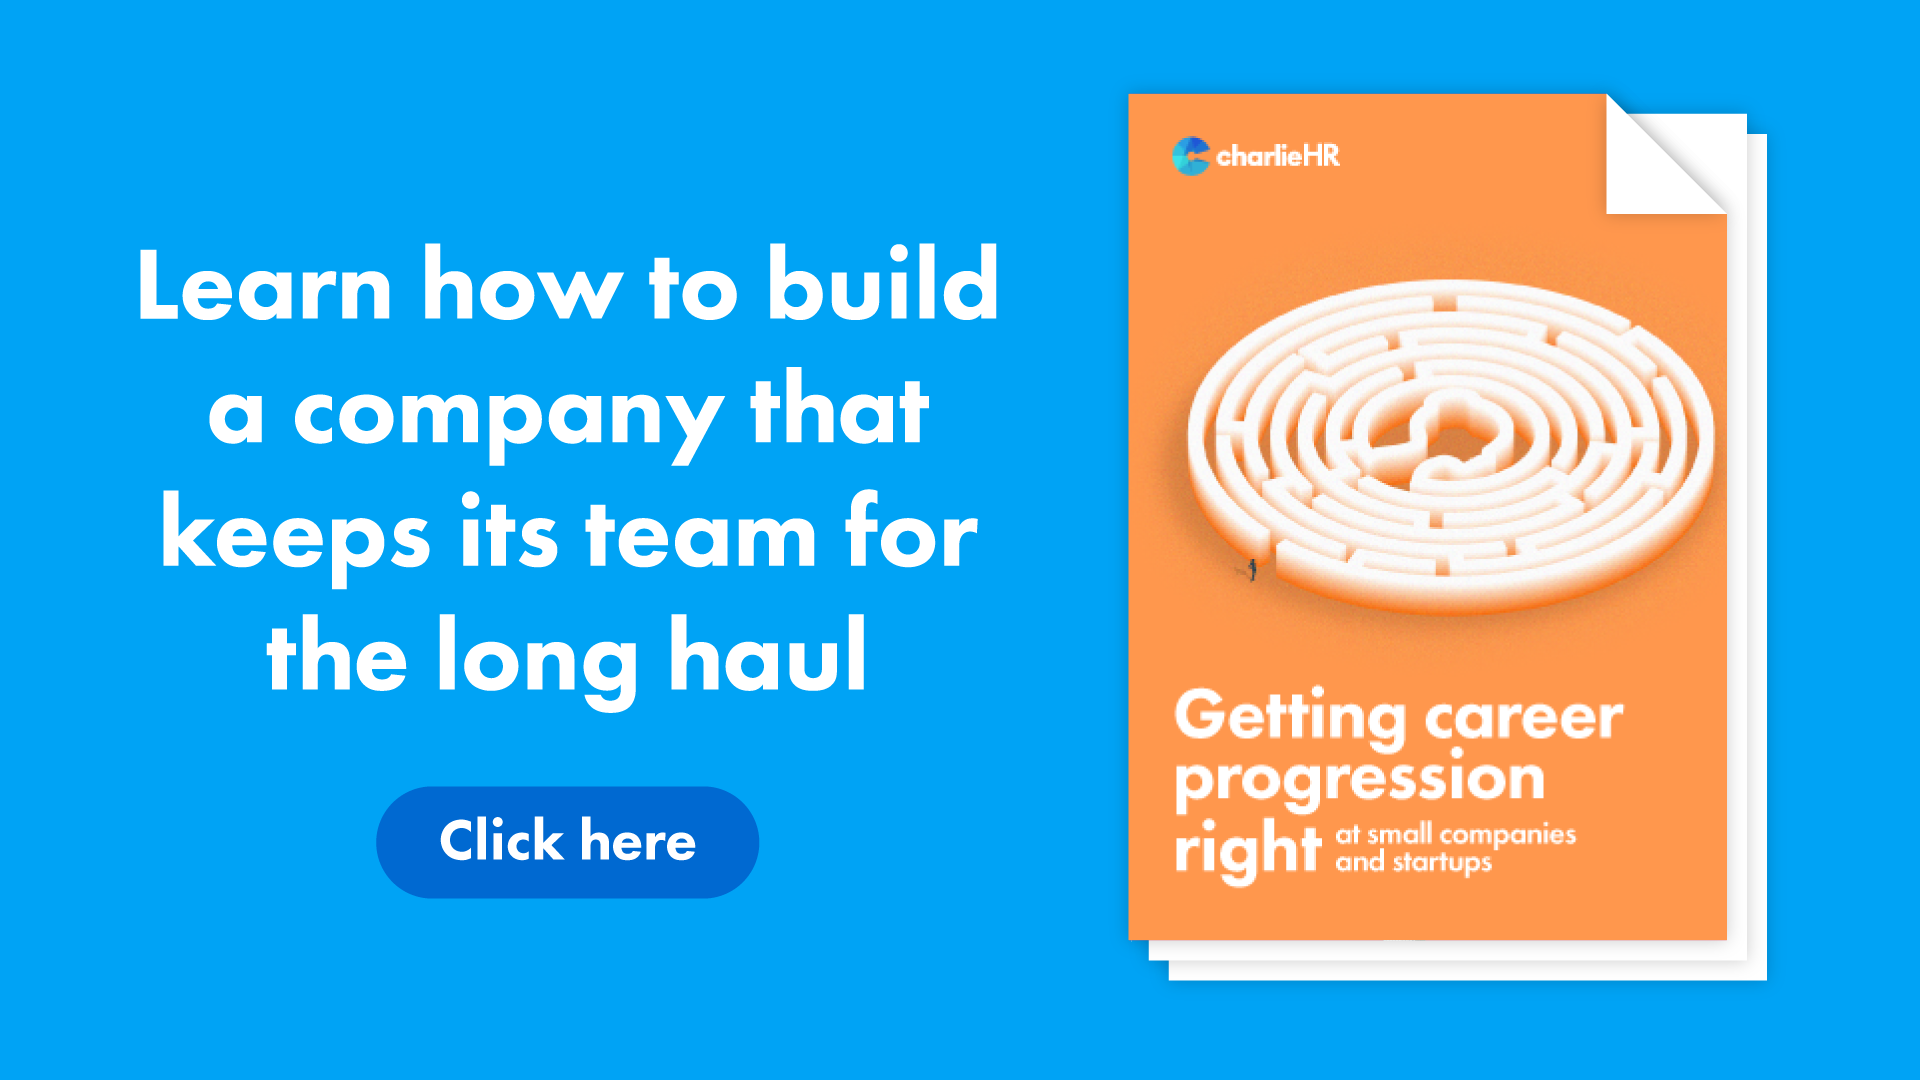 Click here to keep your team in for the long haul with career progression framework